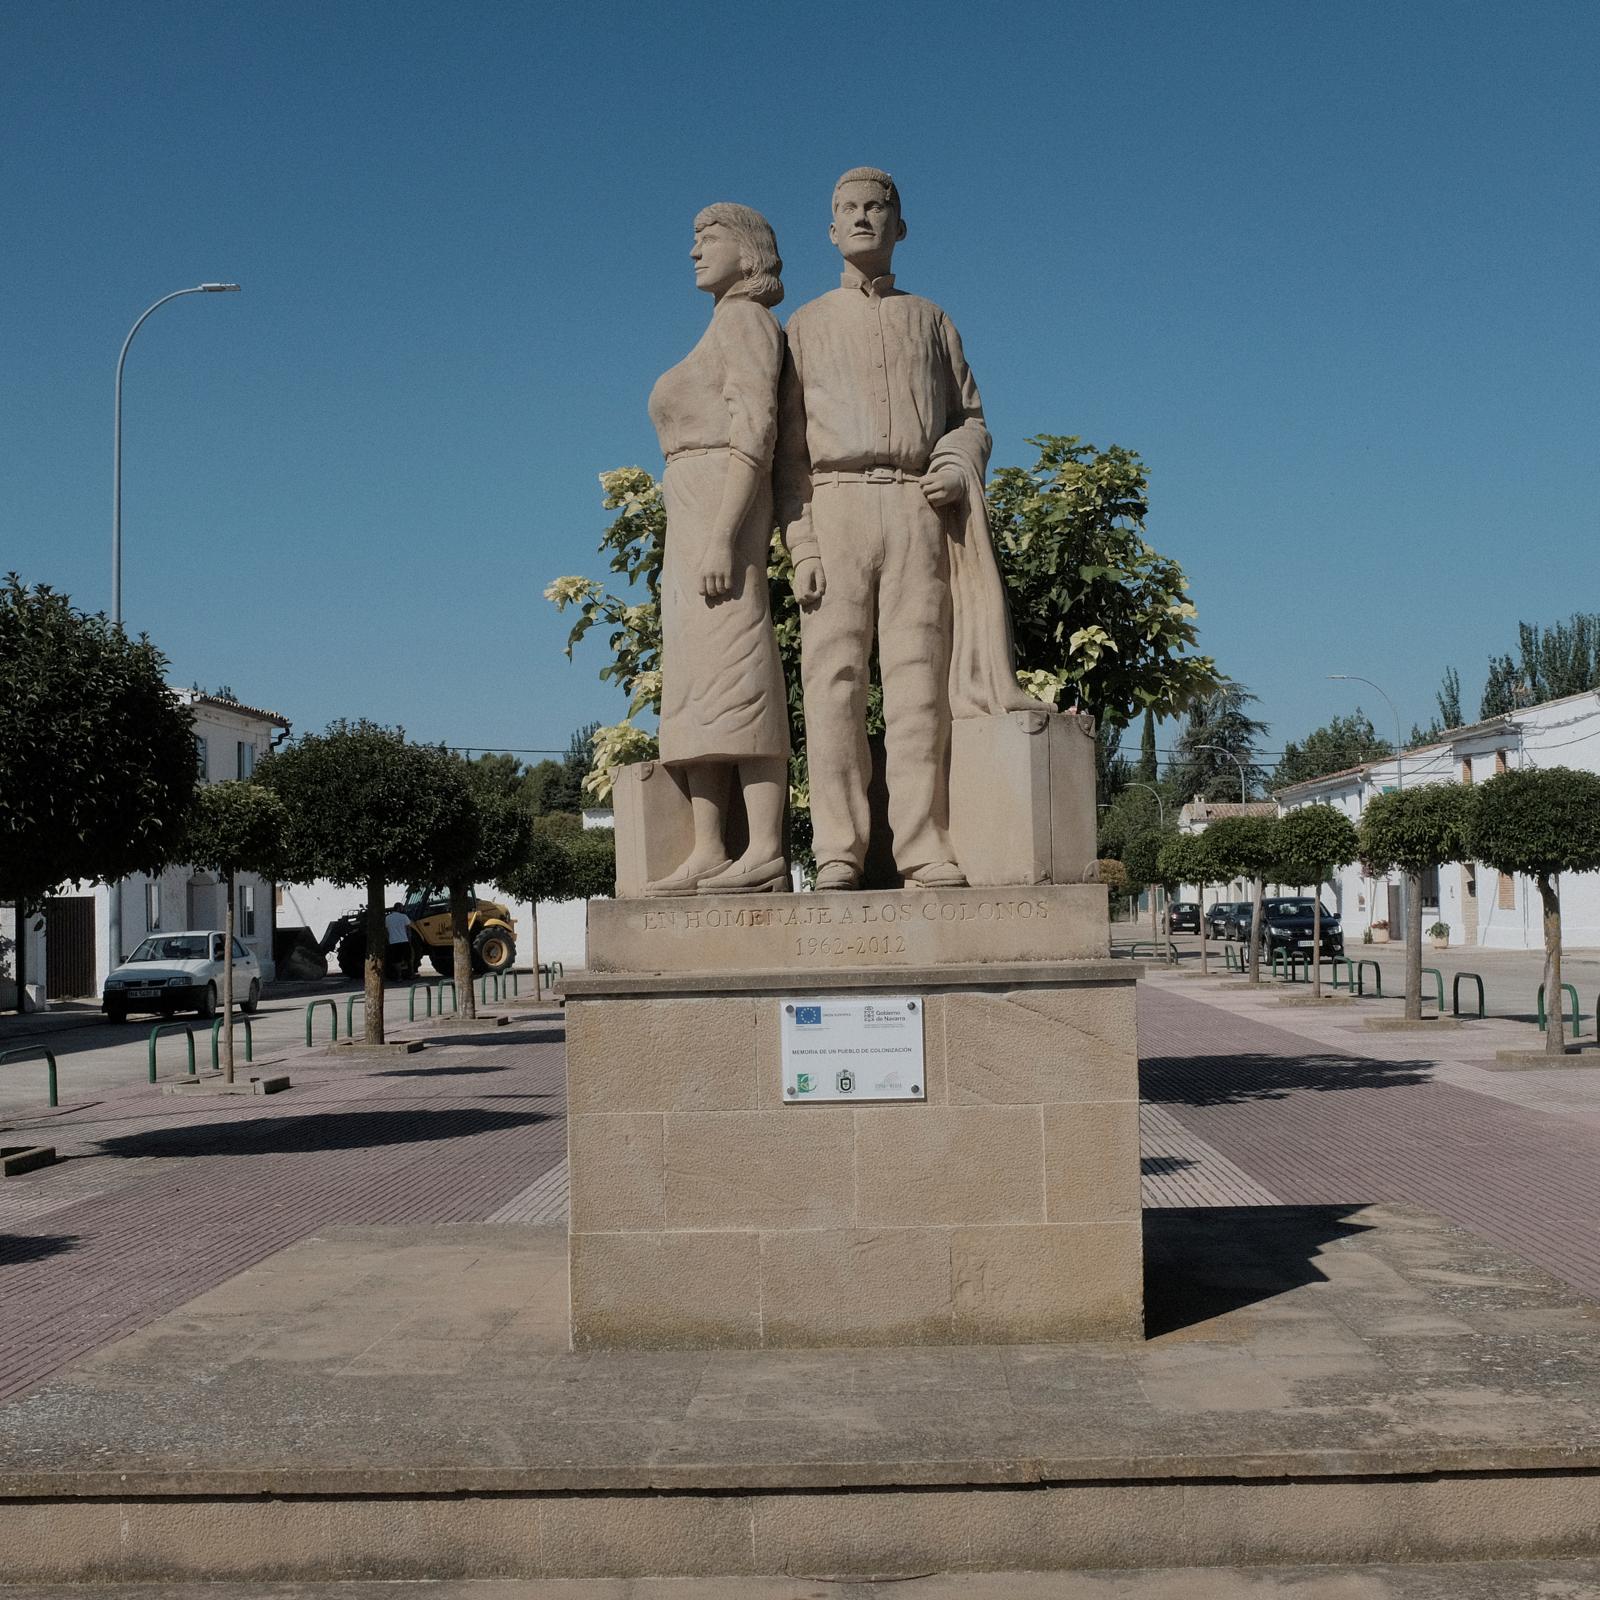 Spanish Settlers - A statue in memory of the first settlers in Figarol...